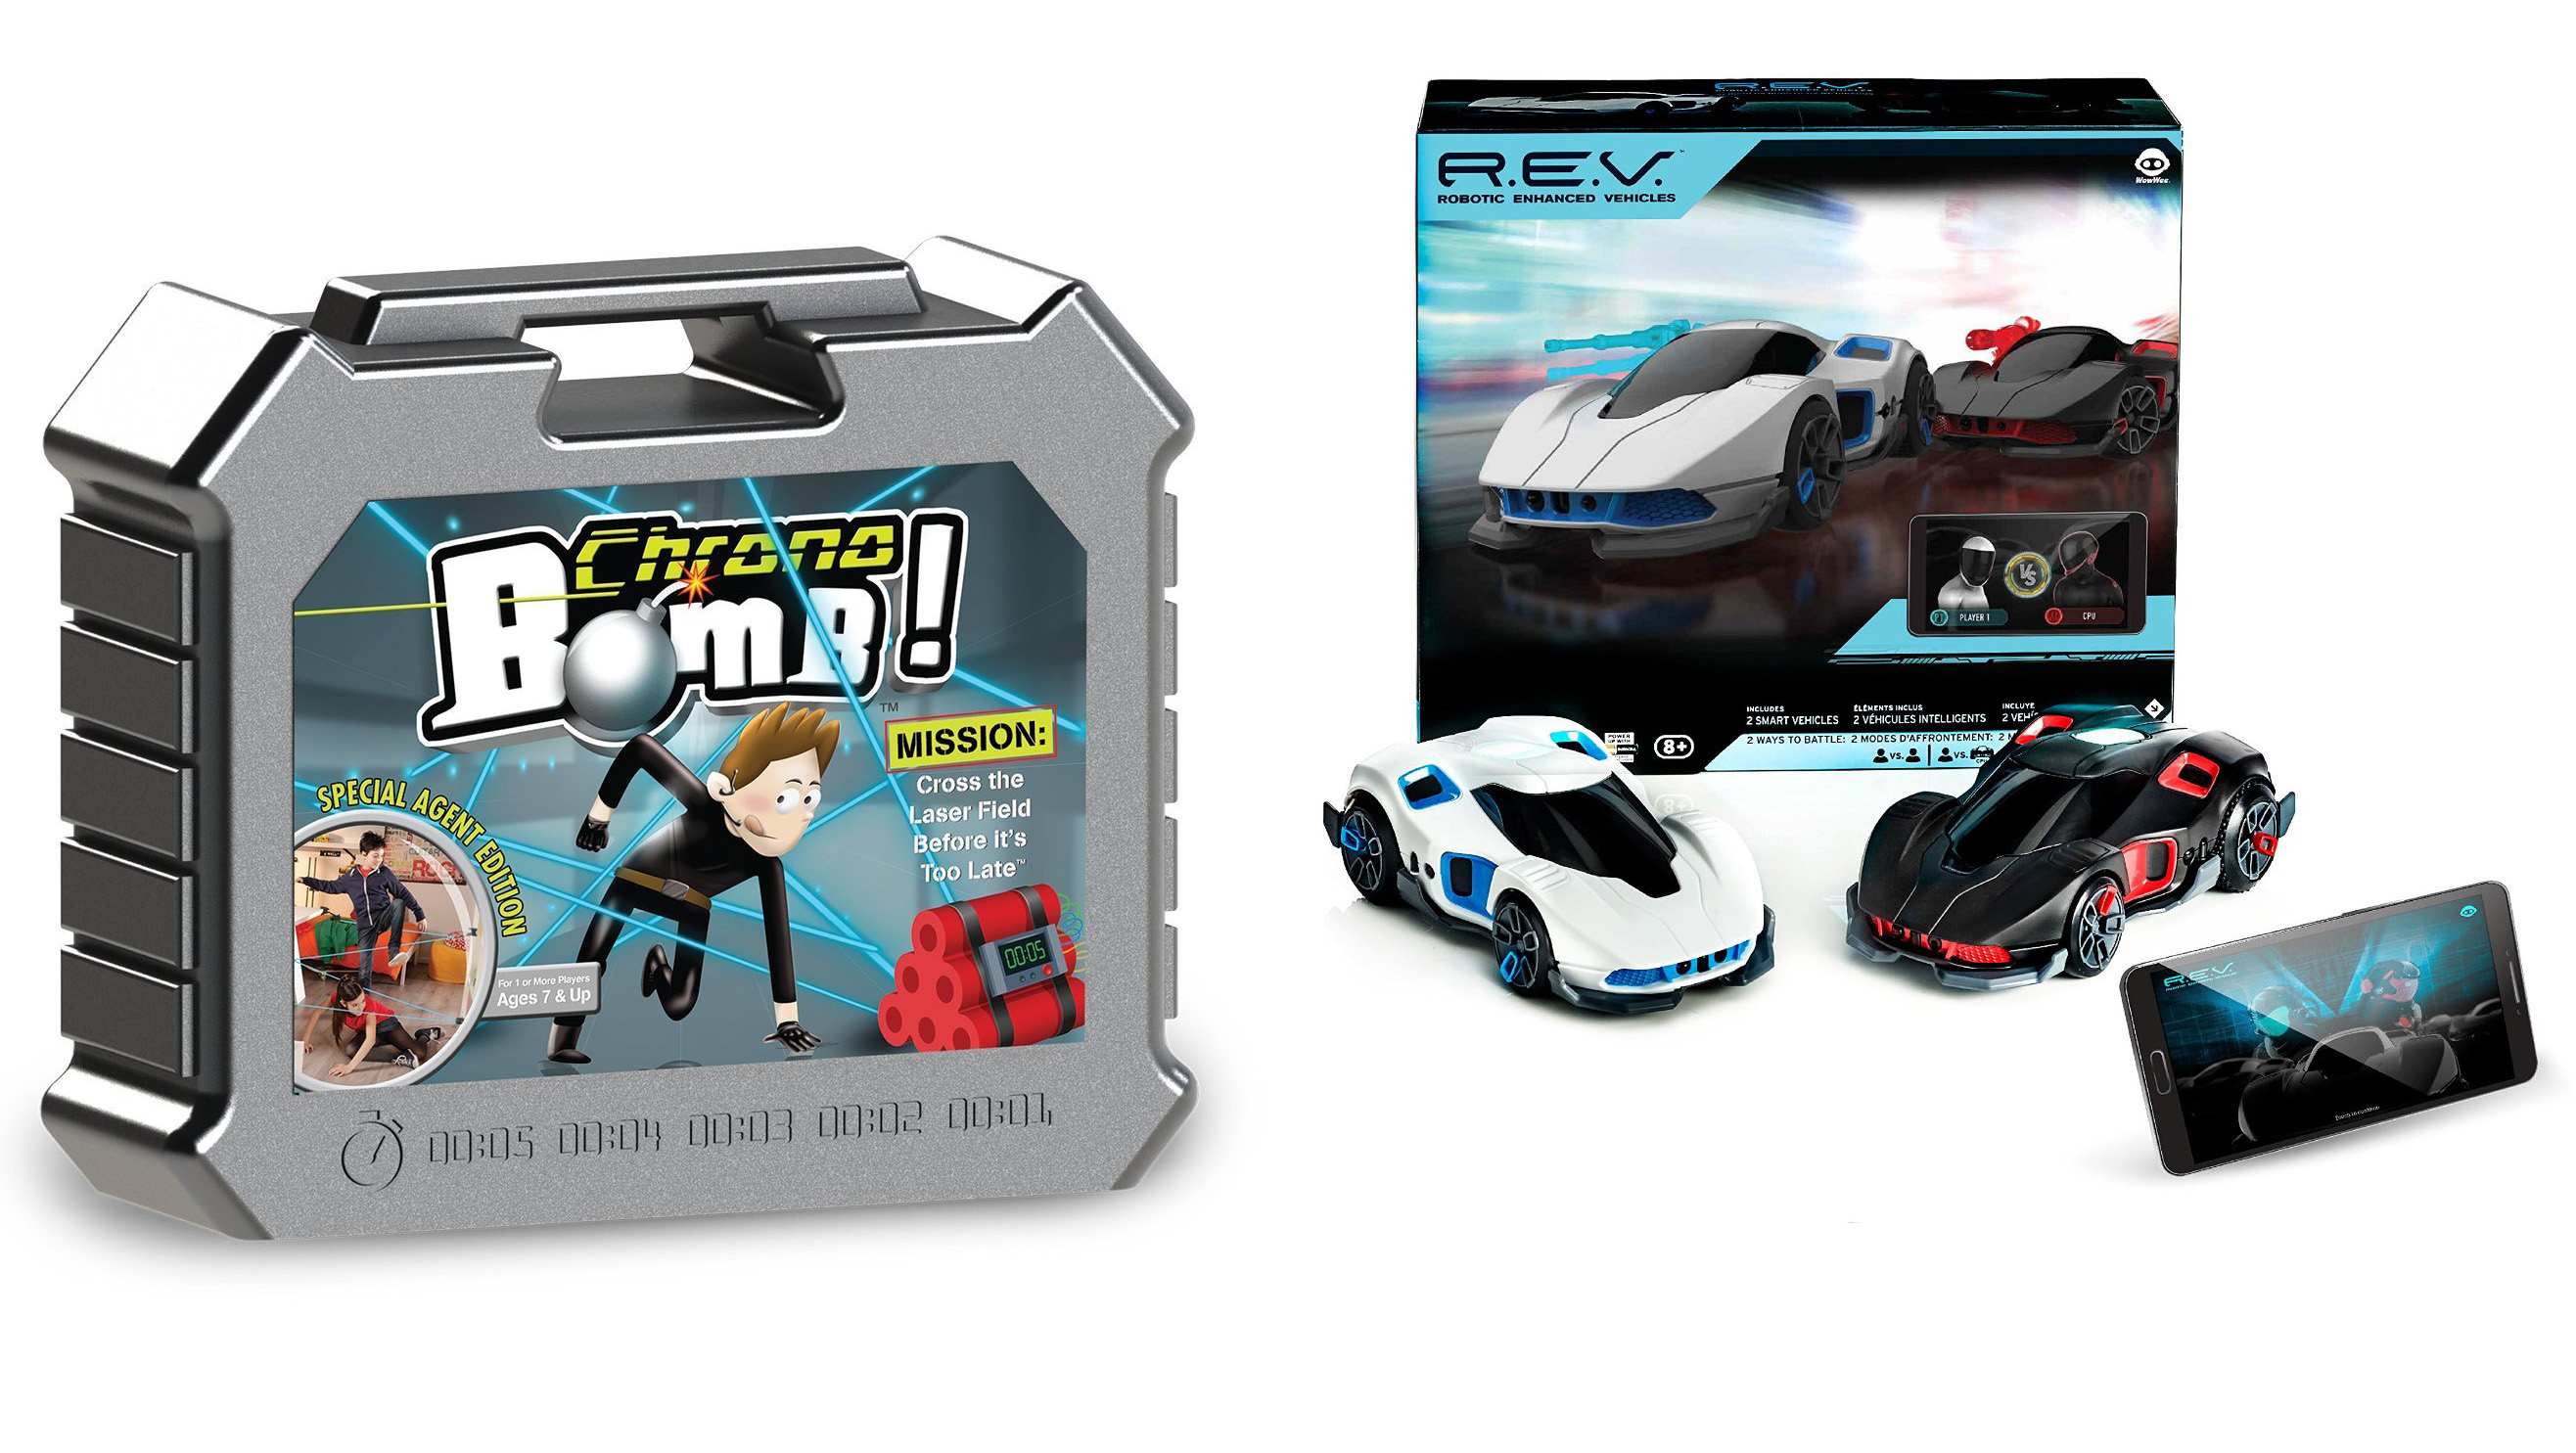 top toys for boys age 10